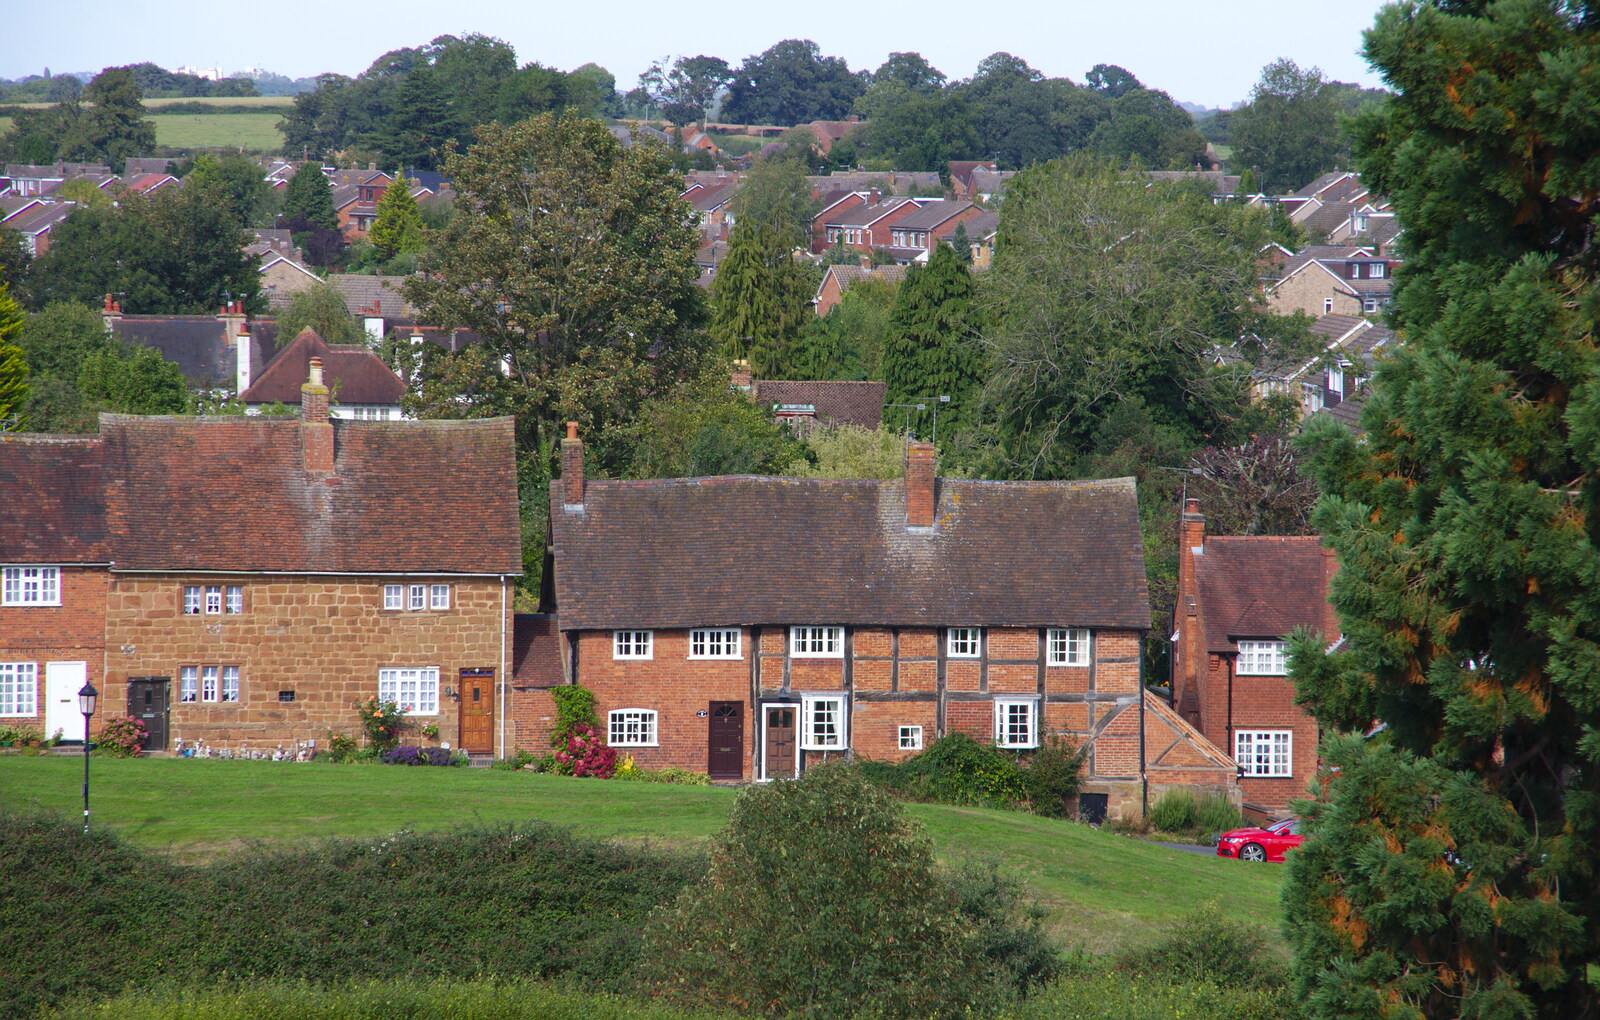 The village of Kenilworth from Kenilworth Castle and the 69th Entry Reunion Dinner, Stratford, Warwickshire - 14th September 2019